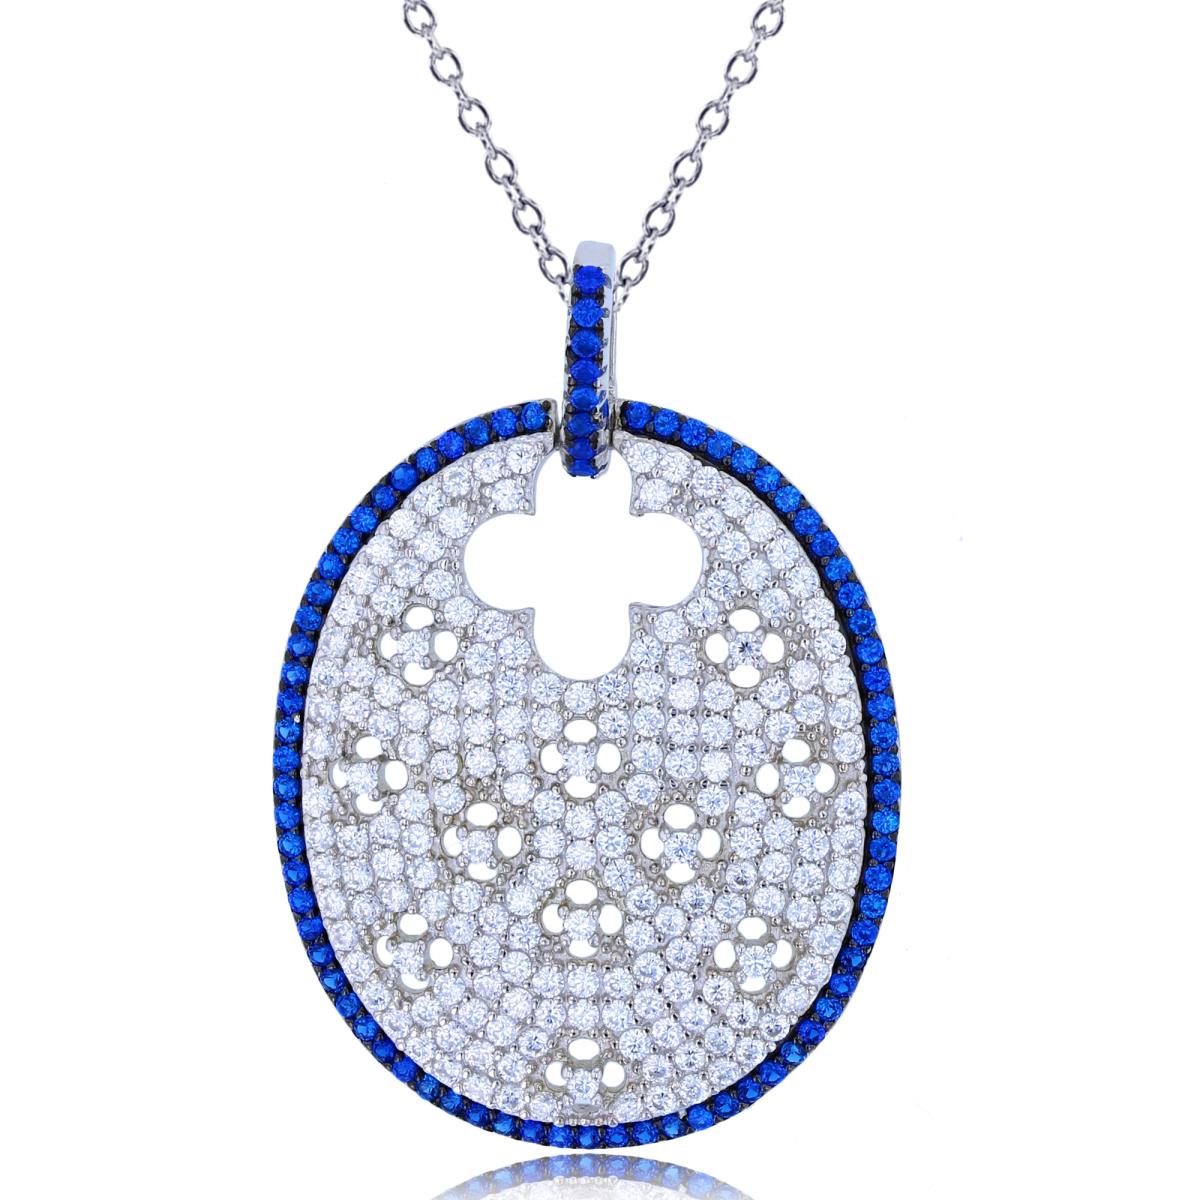 Sterling Silver Rhodium Rnd White & #113 Blue Spinel CZ Scattered Clovers on Oval 18"Necklace